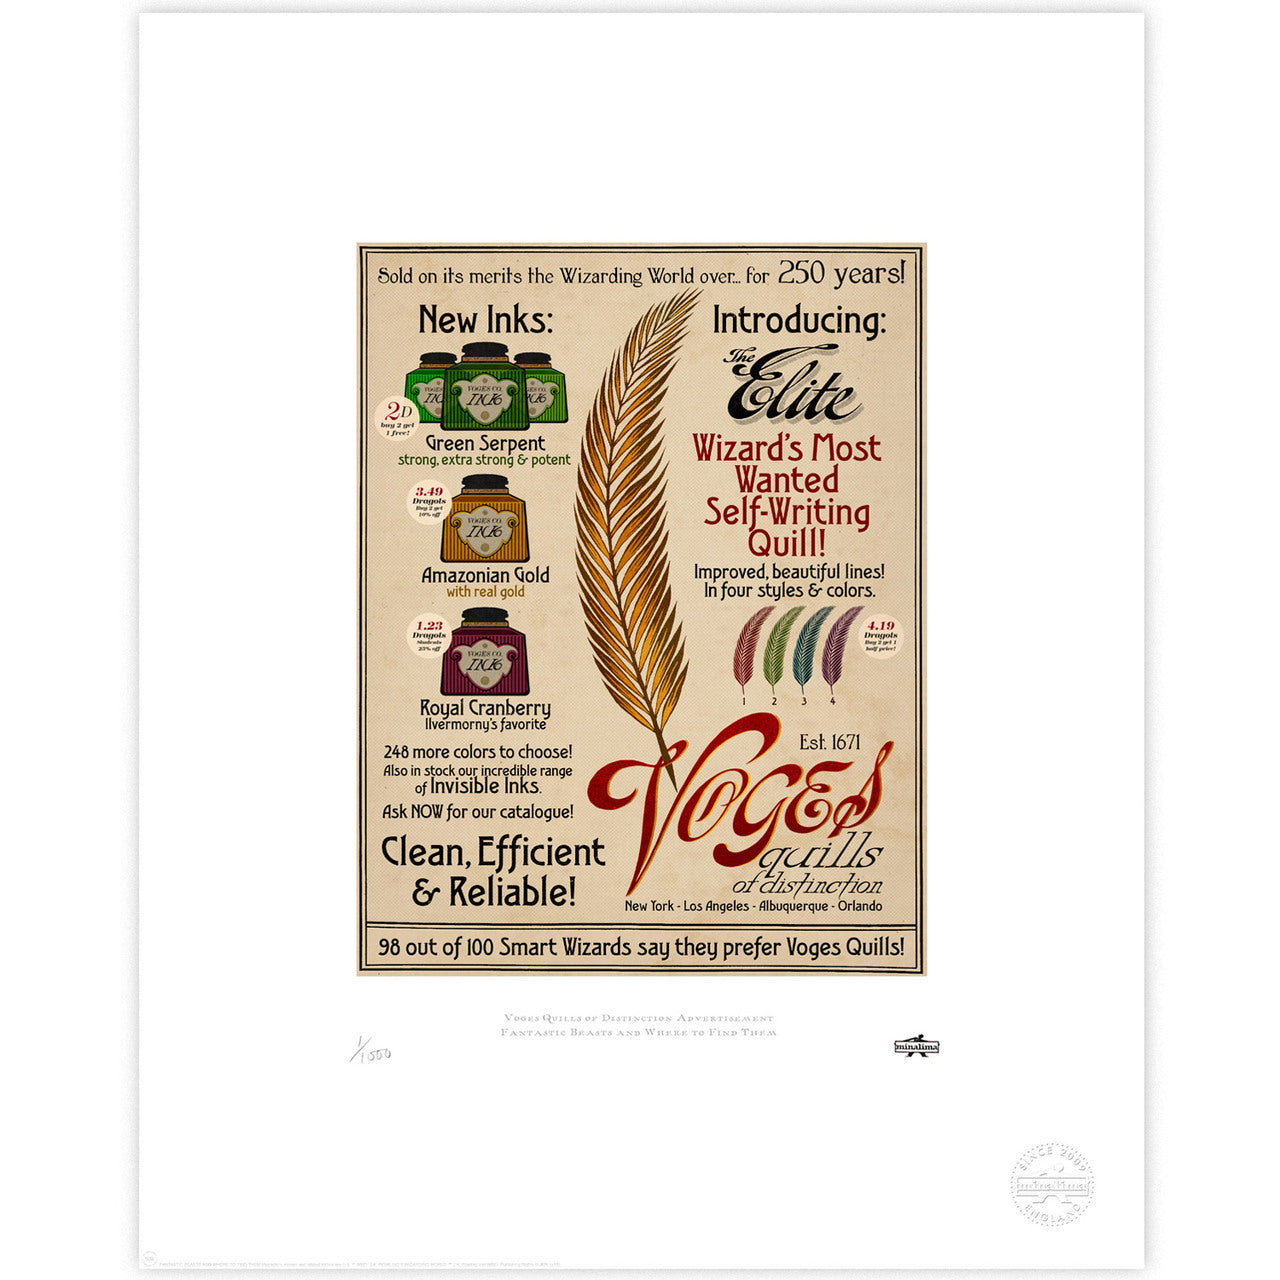 Voges Quills of Distinction Limited Edition Art Print